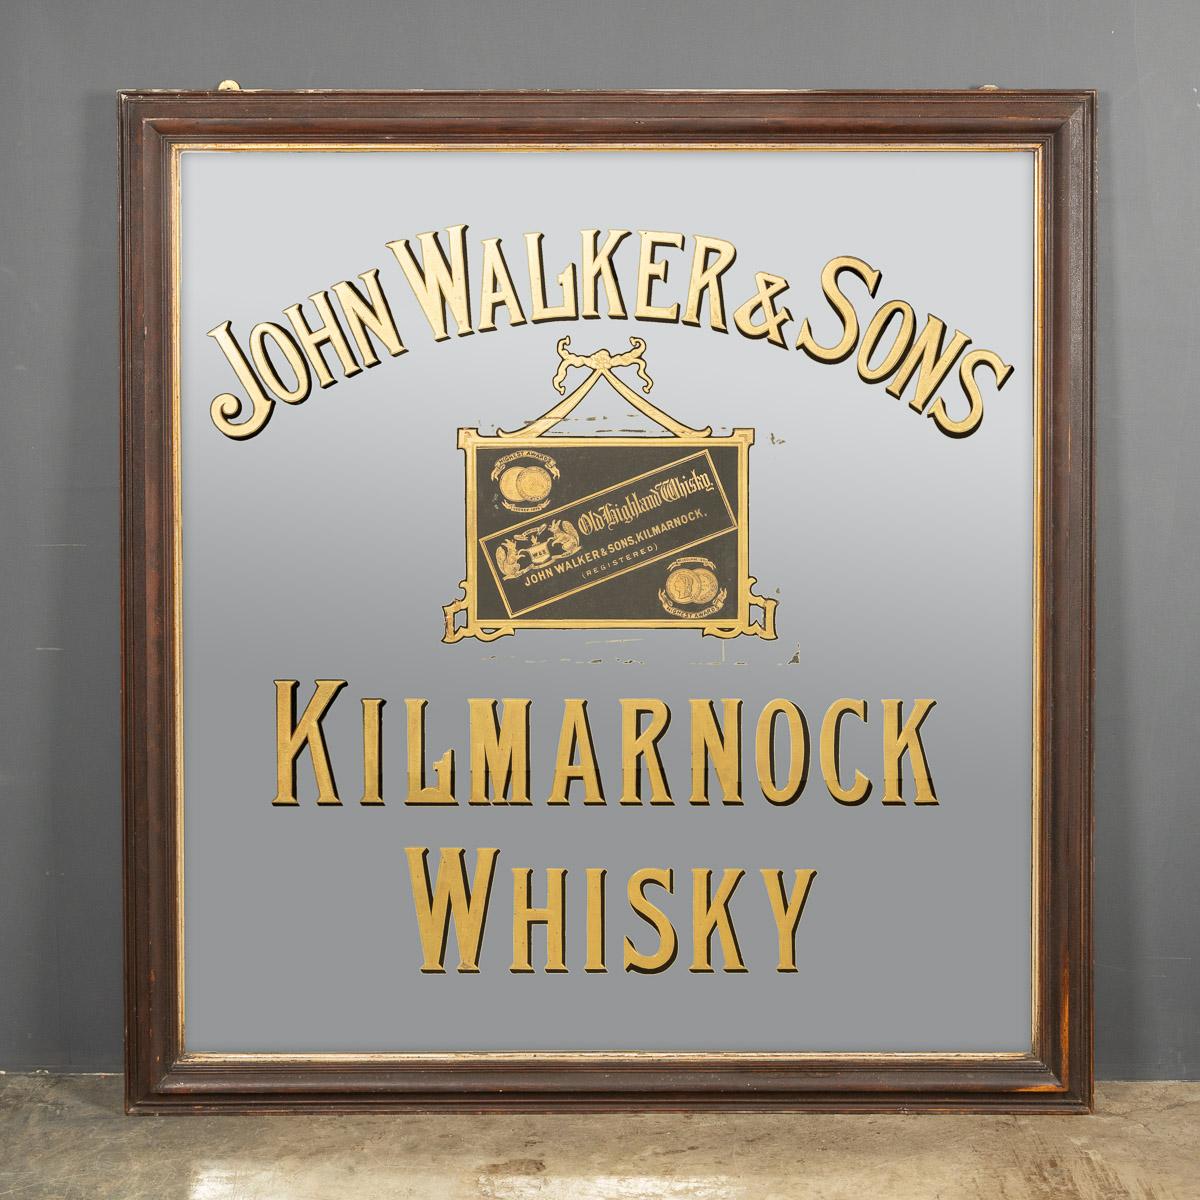 Antique 20th century rare advertising mirror for John Walker & Sons of Kilmarnock, Old Highland Whiskey. Before the rebranding of 1909 when John Walker & Sons company began to use the striding man and coloured labels for each whisky, Old Highland